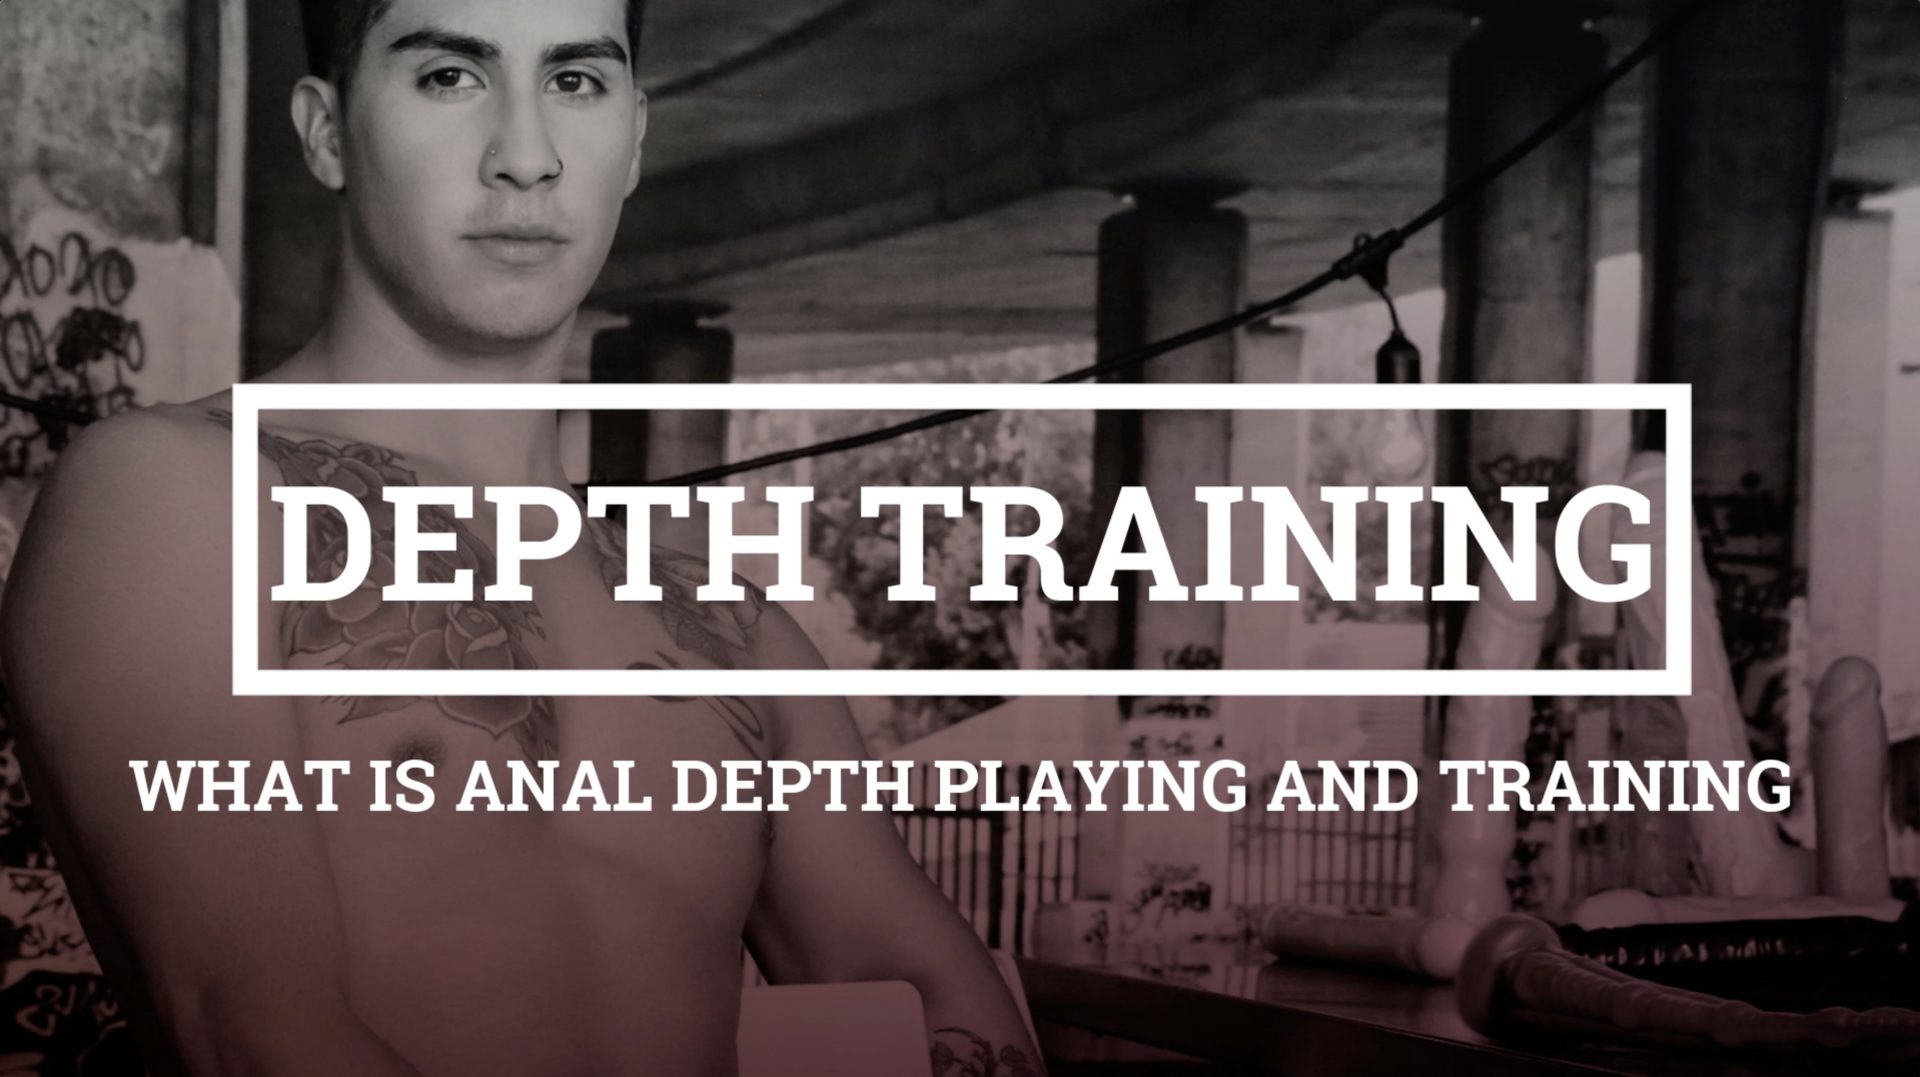 Anal Depth playing and Depth Training Dildos – An overview of long long dildos that go into the depths!